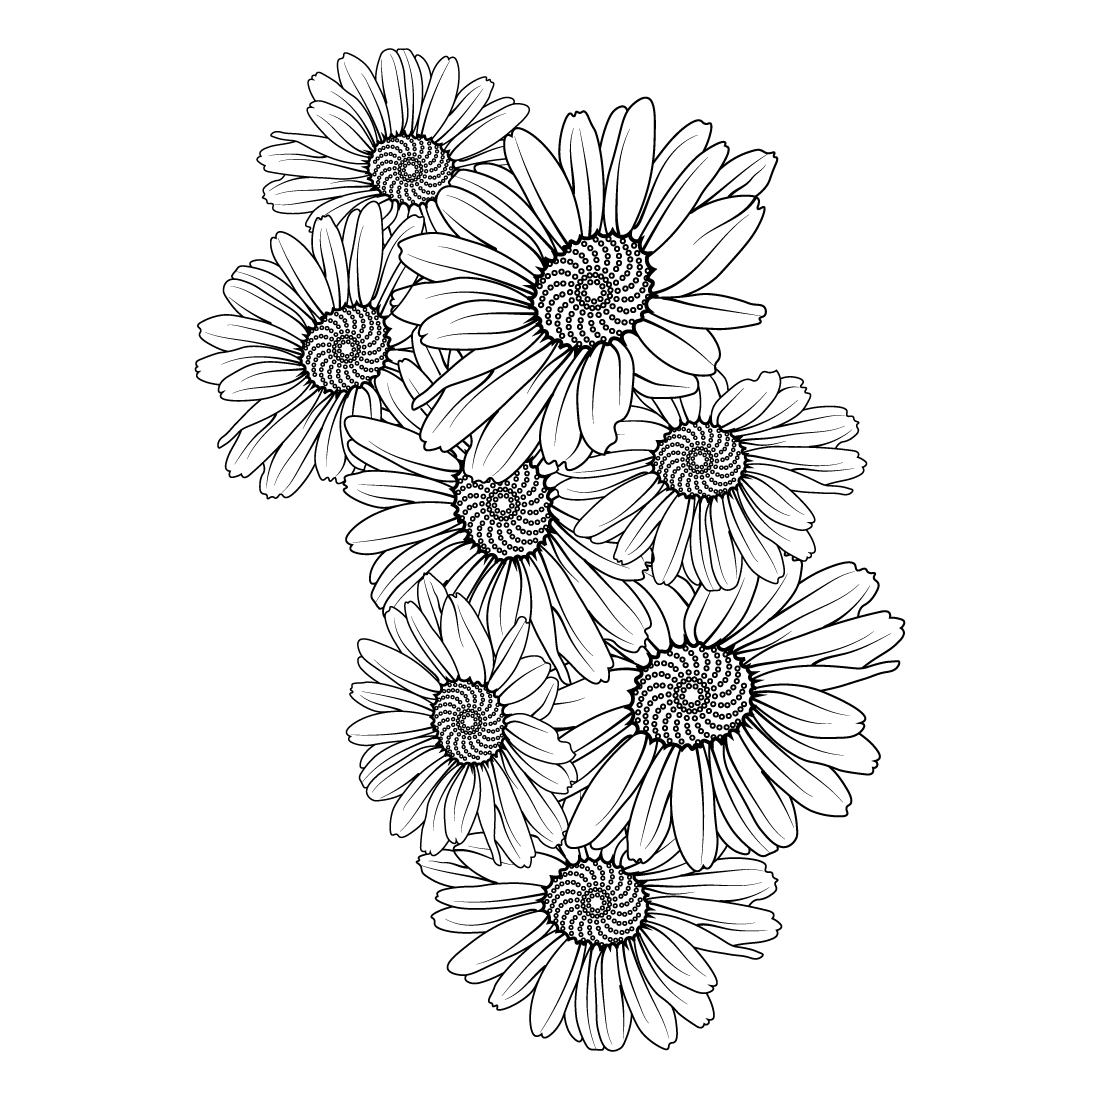 Daisy flower coloring pages, daisy flower bouquet tattoo, small daisy tattoo, elegant minimalist daisy tattoo, preview image.